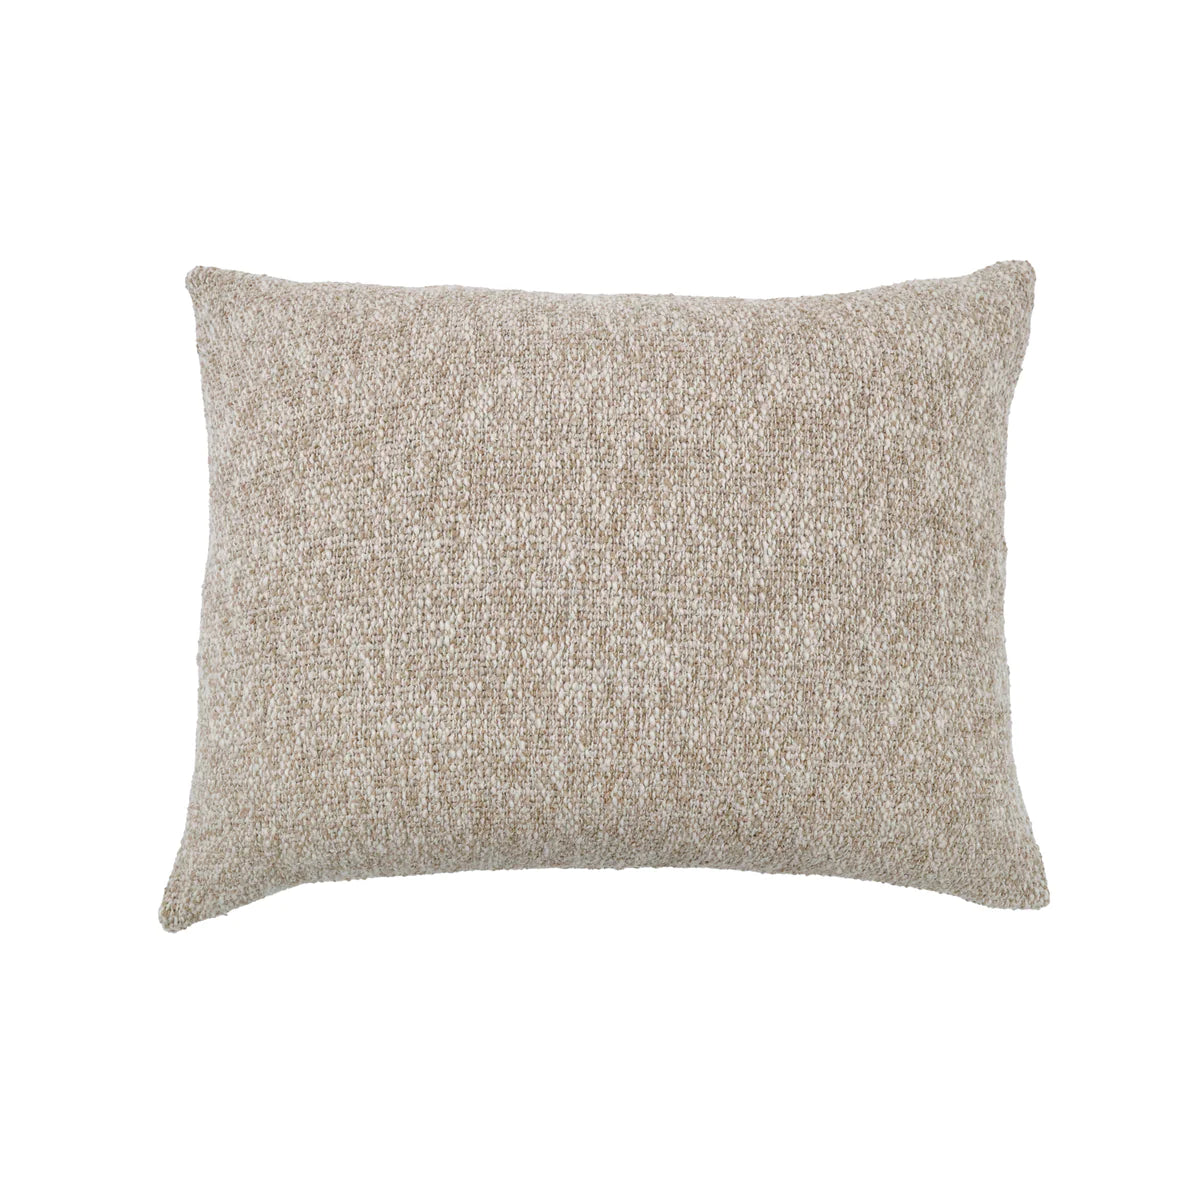 Brentwood Big Pillow by Pom Pom at Home